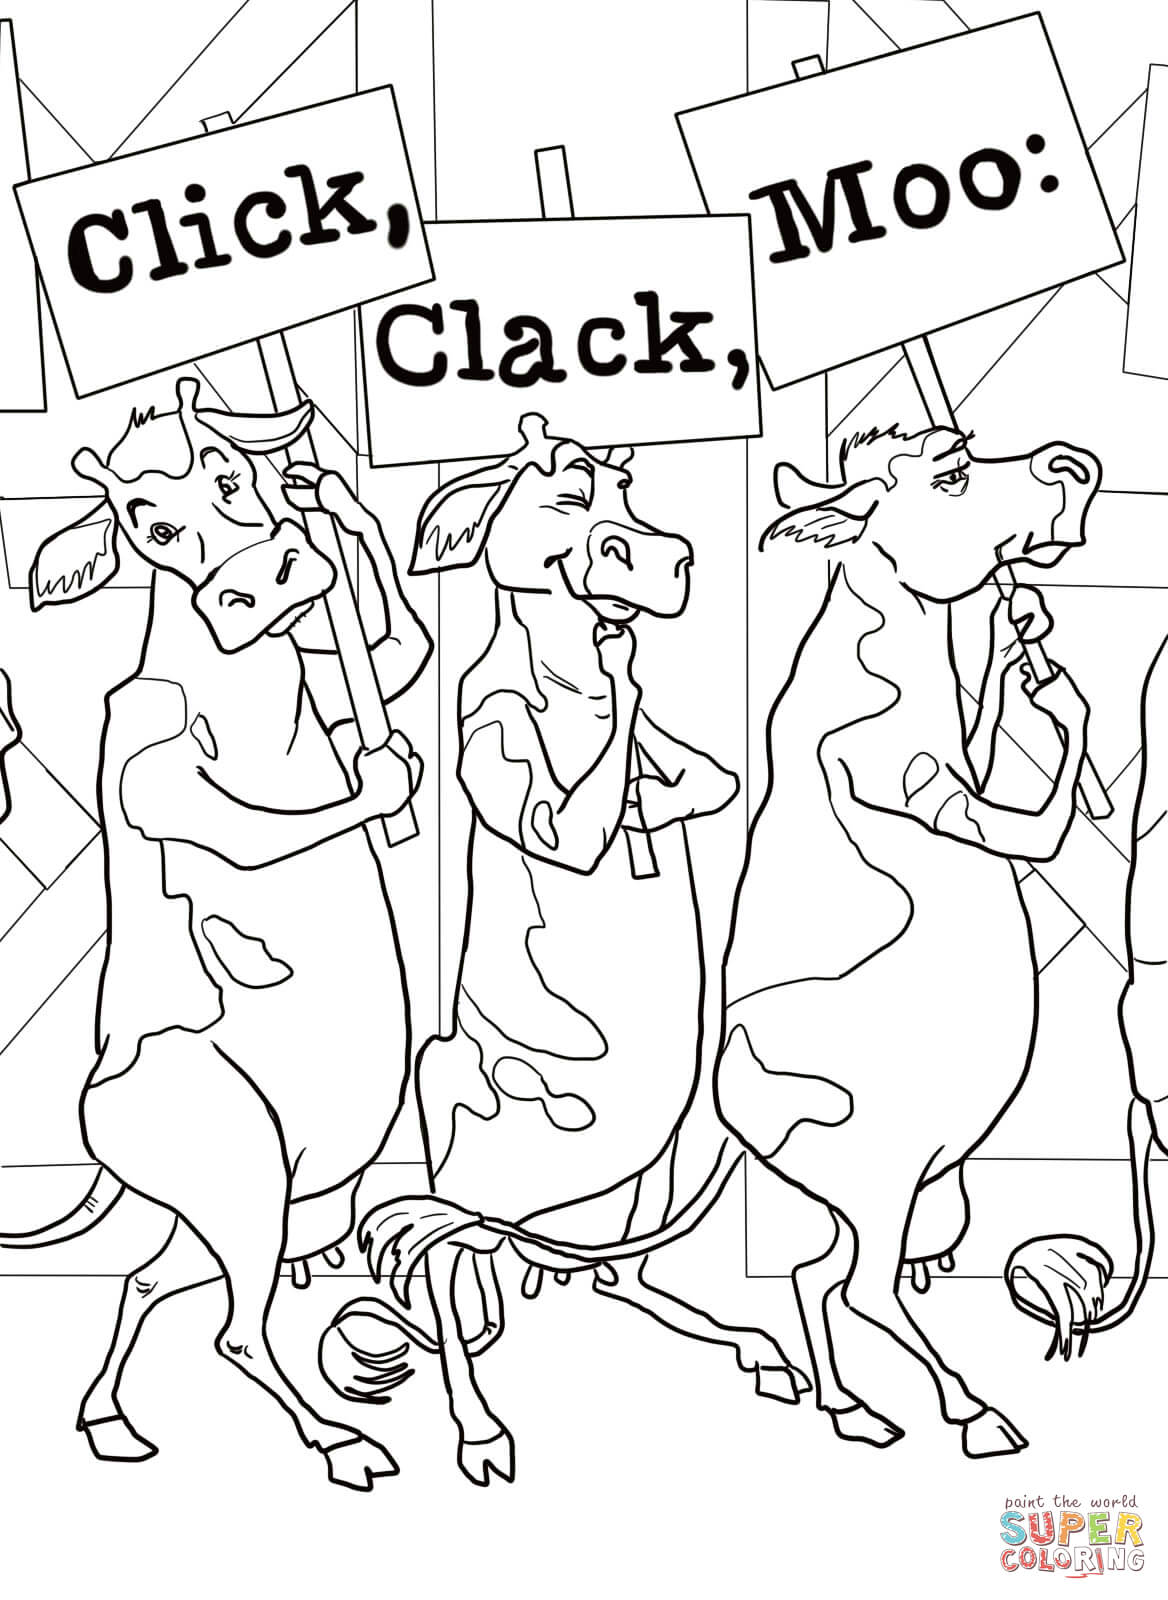 Click Clack Moo Cows That Type coloring page | Free Printable ...